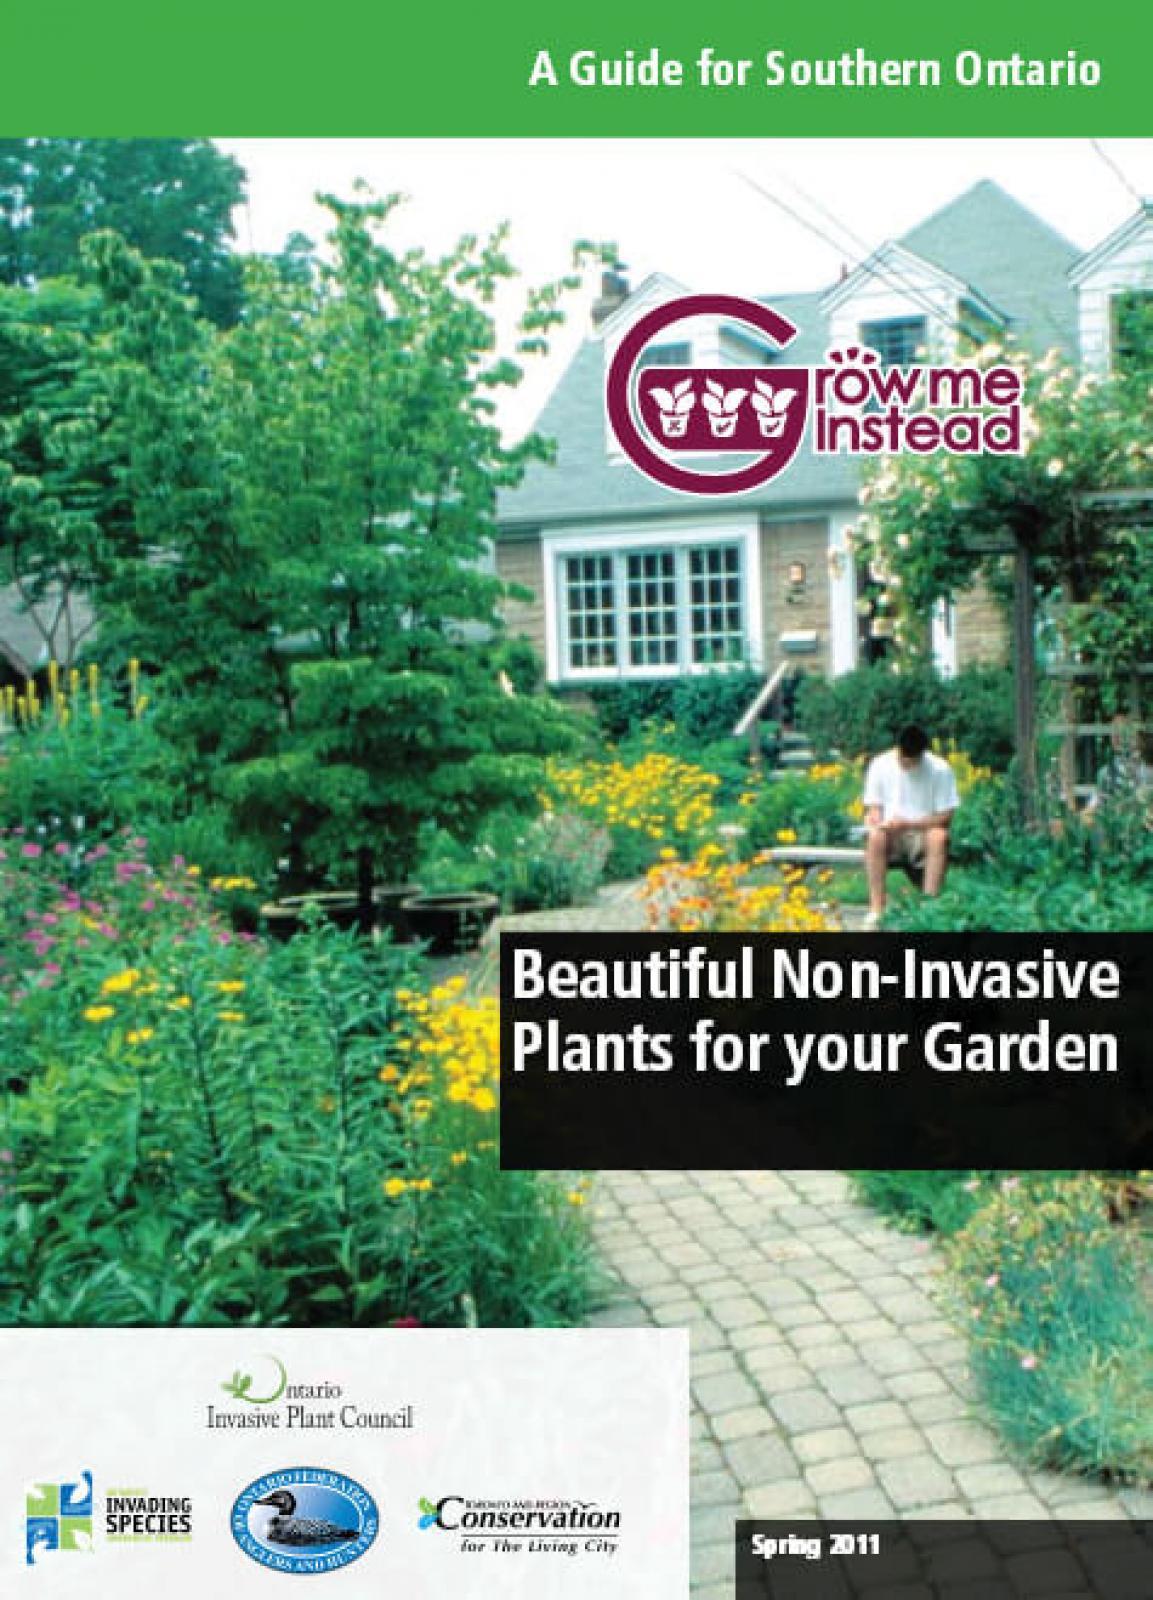 In 2011 the Ontario Invasive Plant Council released this guide, Grow Me Instead.